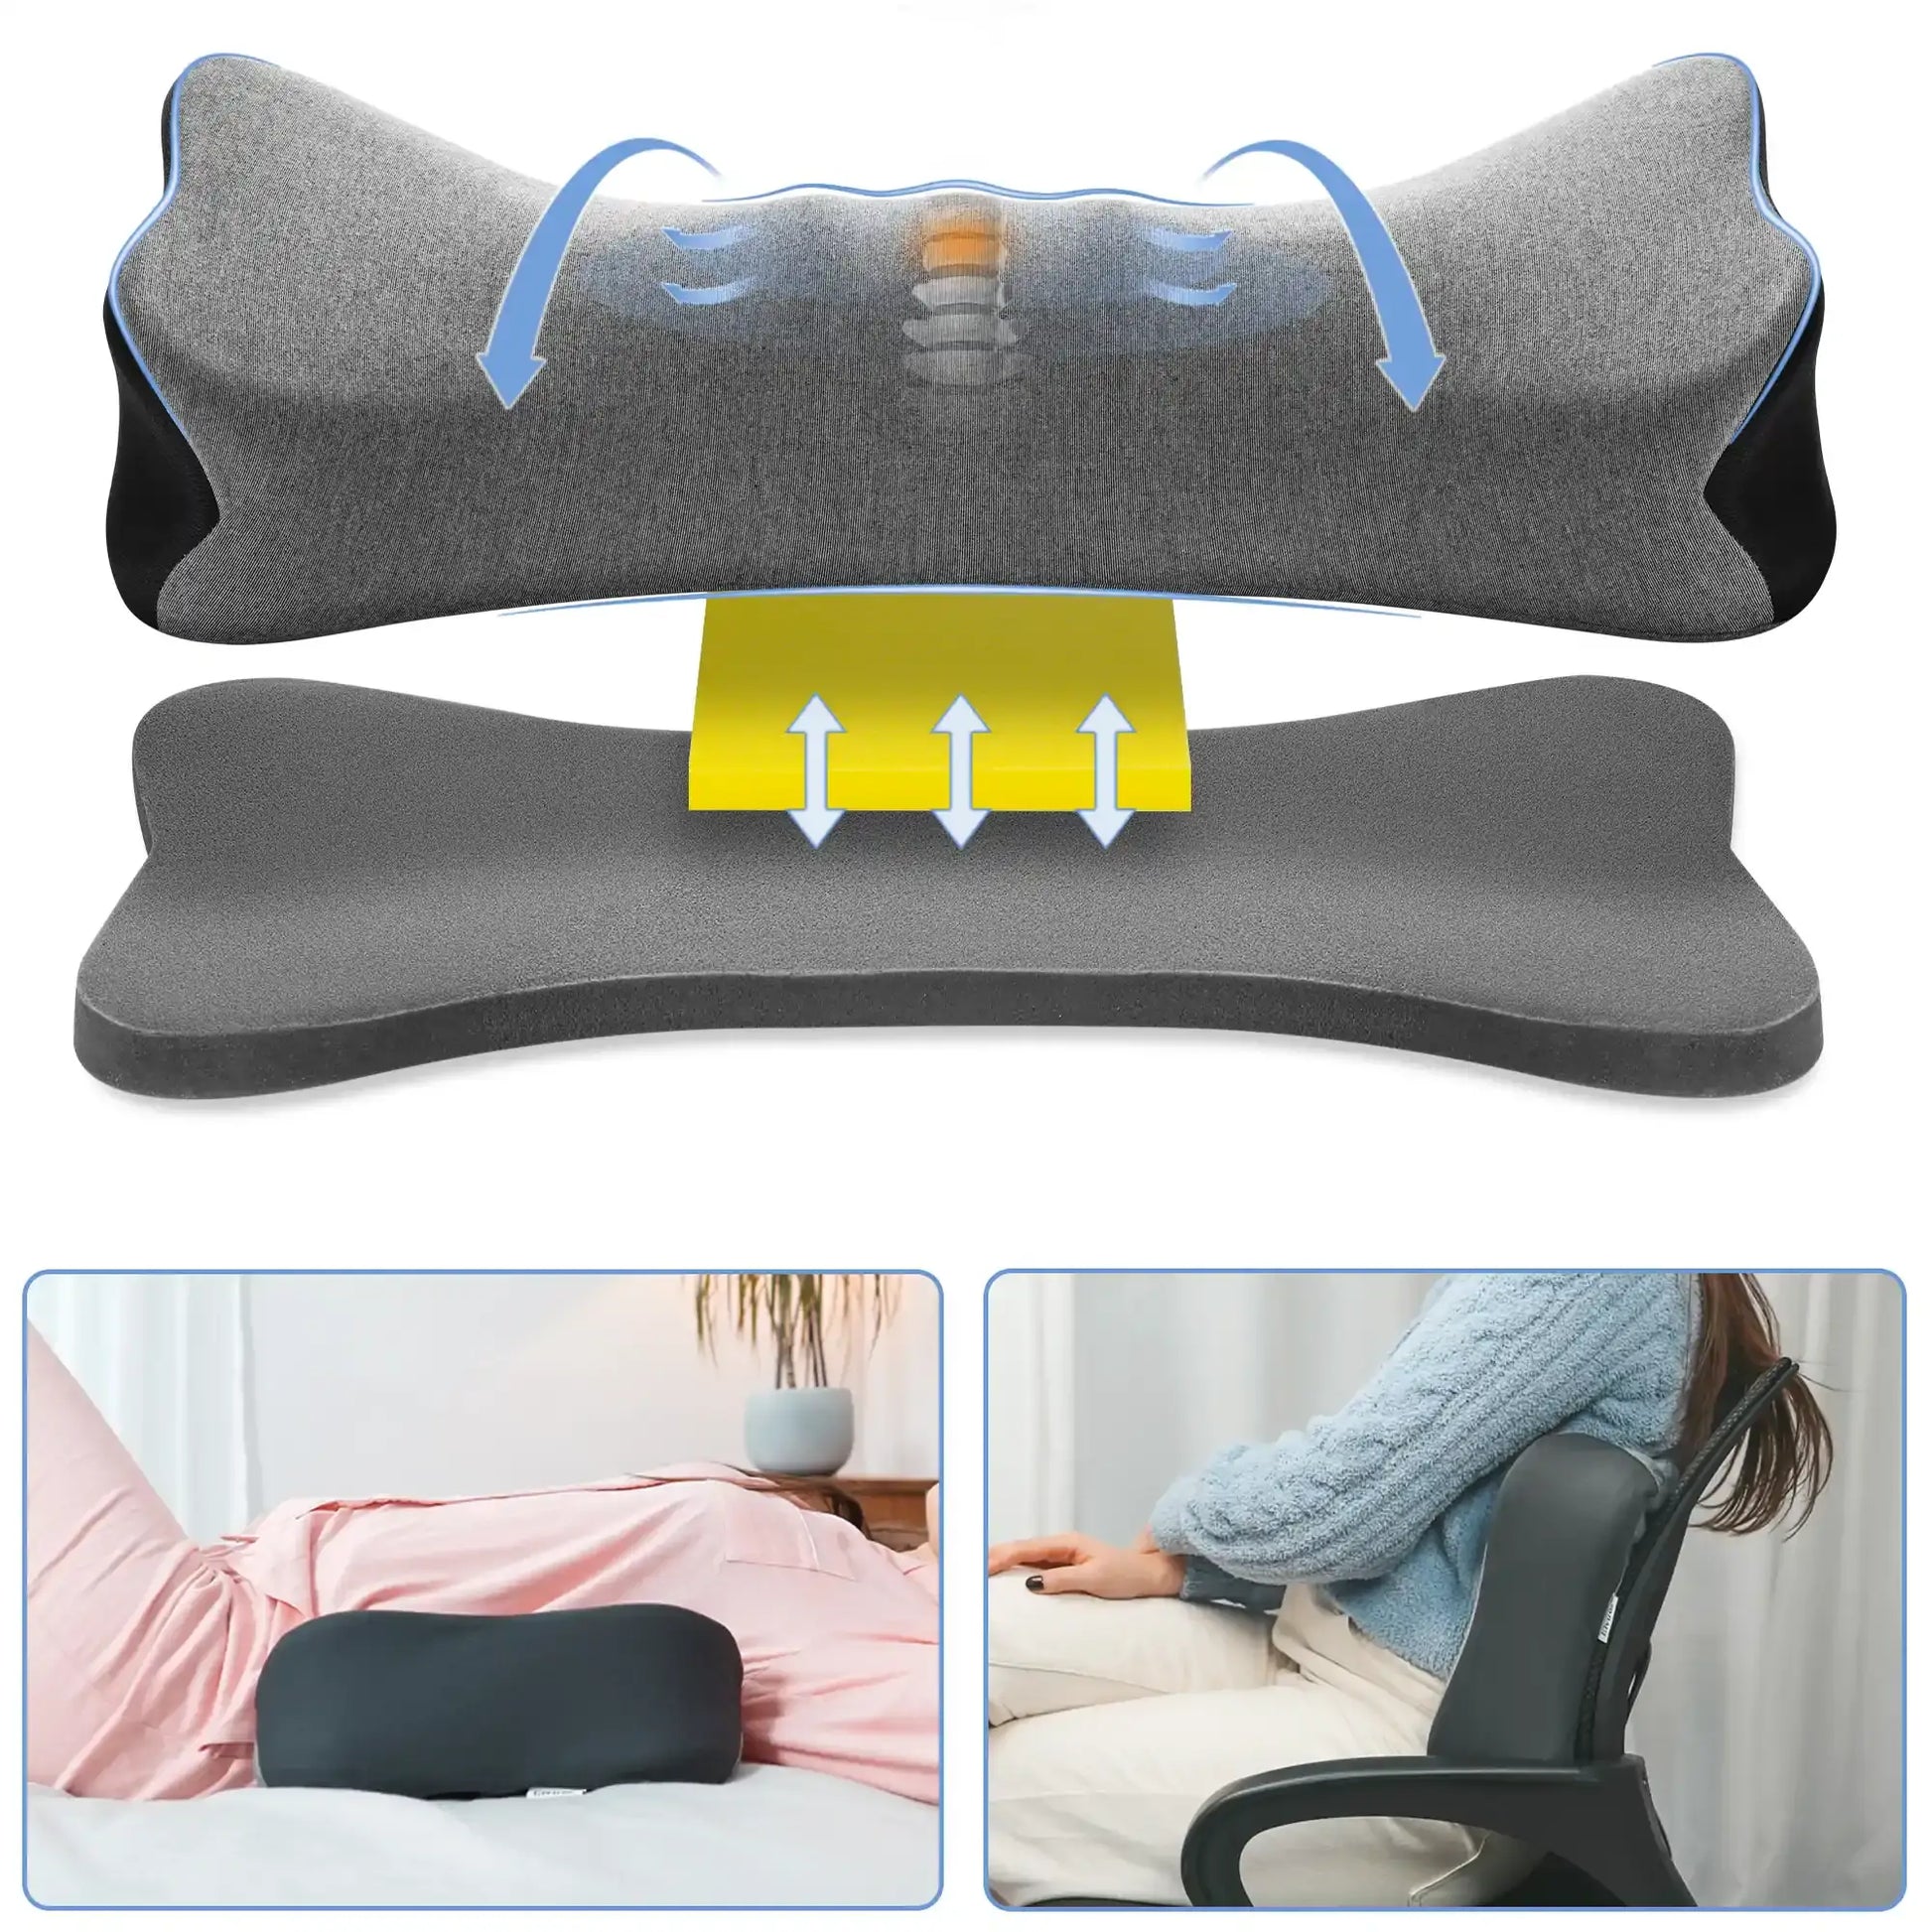 Lumbar Support Pillow, Memory Foam Lumbar Pillow That Can Relieve Low Back  Pain, Used for Lumbar Support Cushion for Office Chairs, Recliners, and Car  Seats 